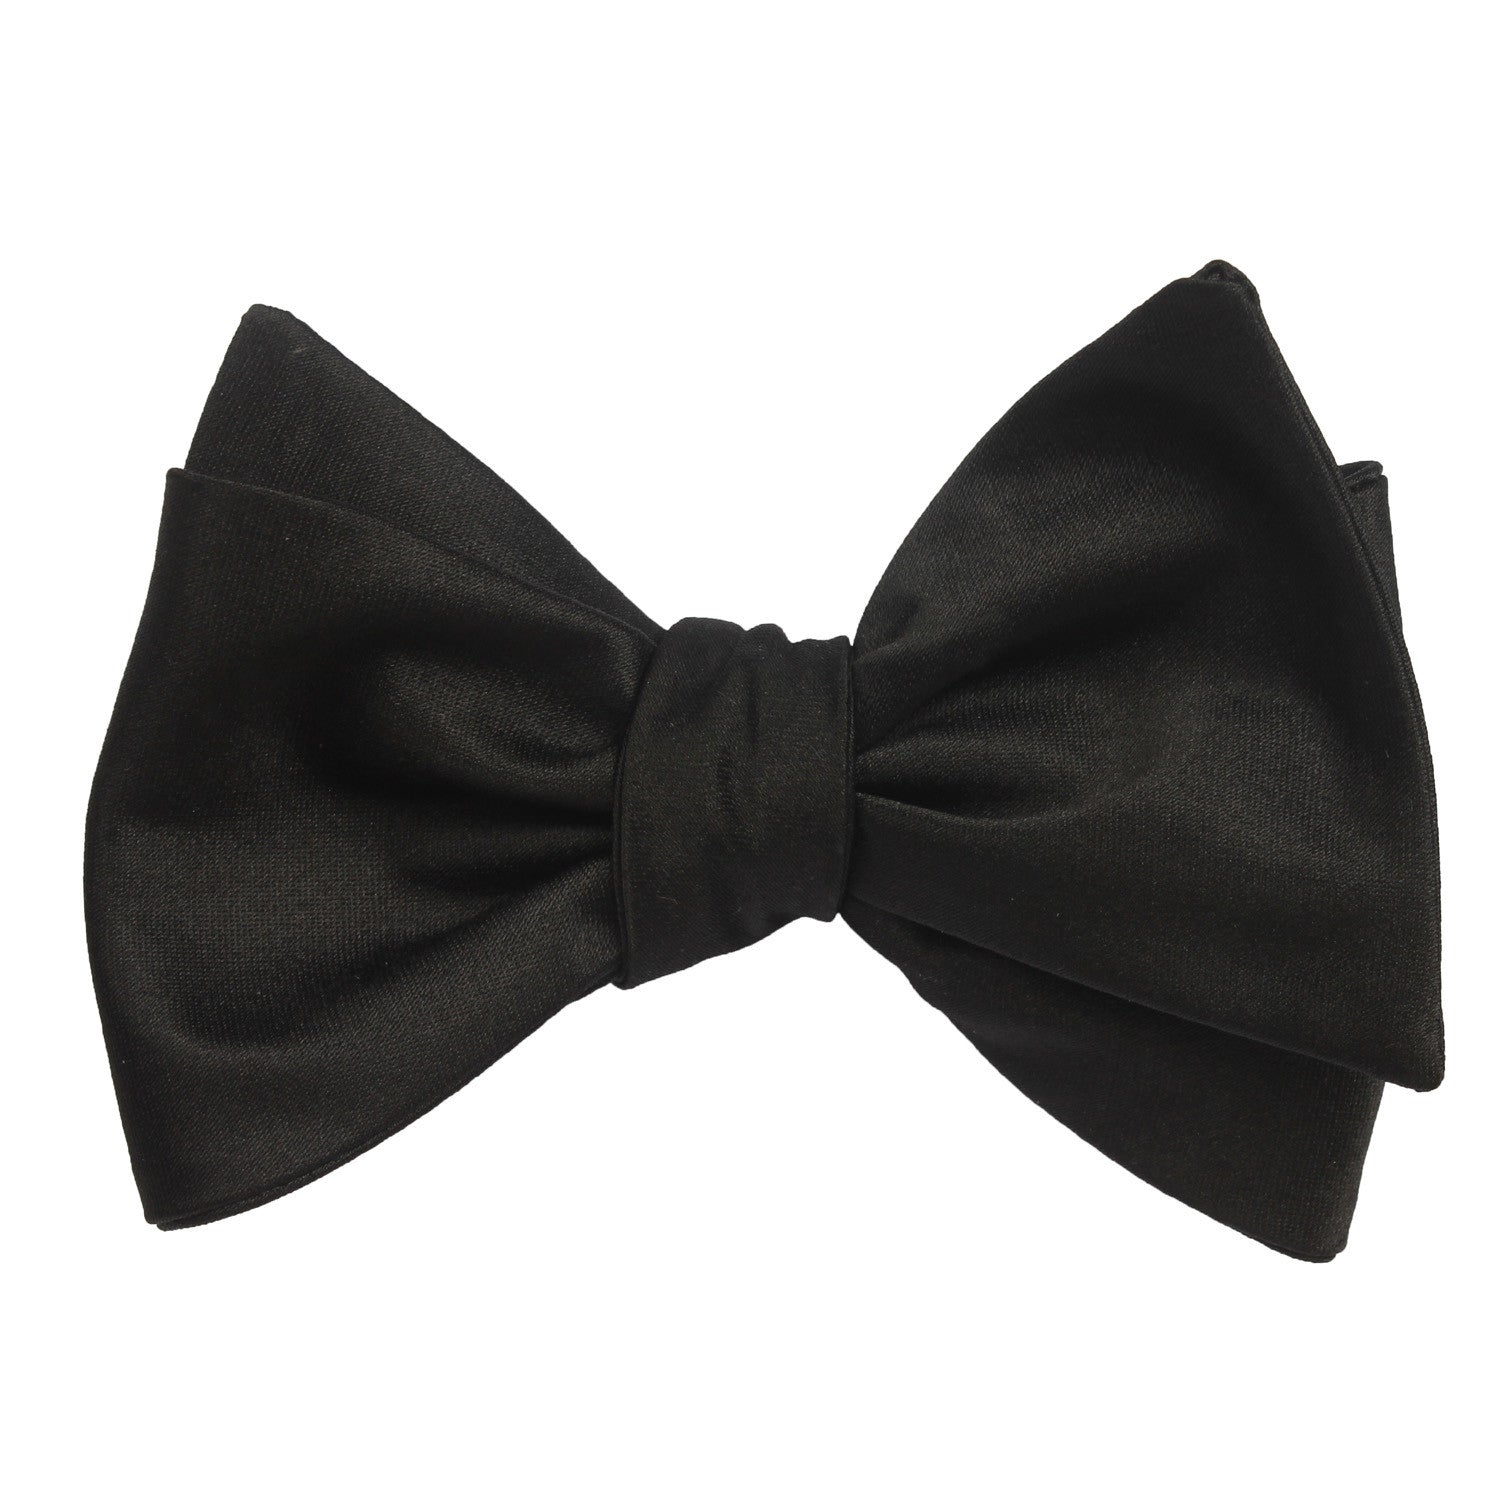 Black - Bow Tie (Untied) Self tied knot by OTAA